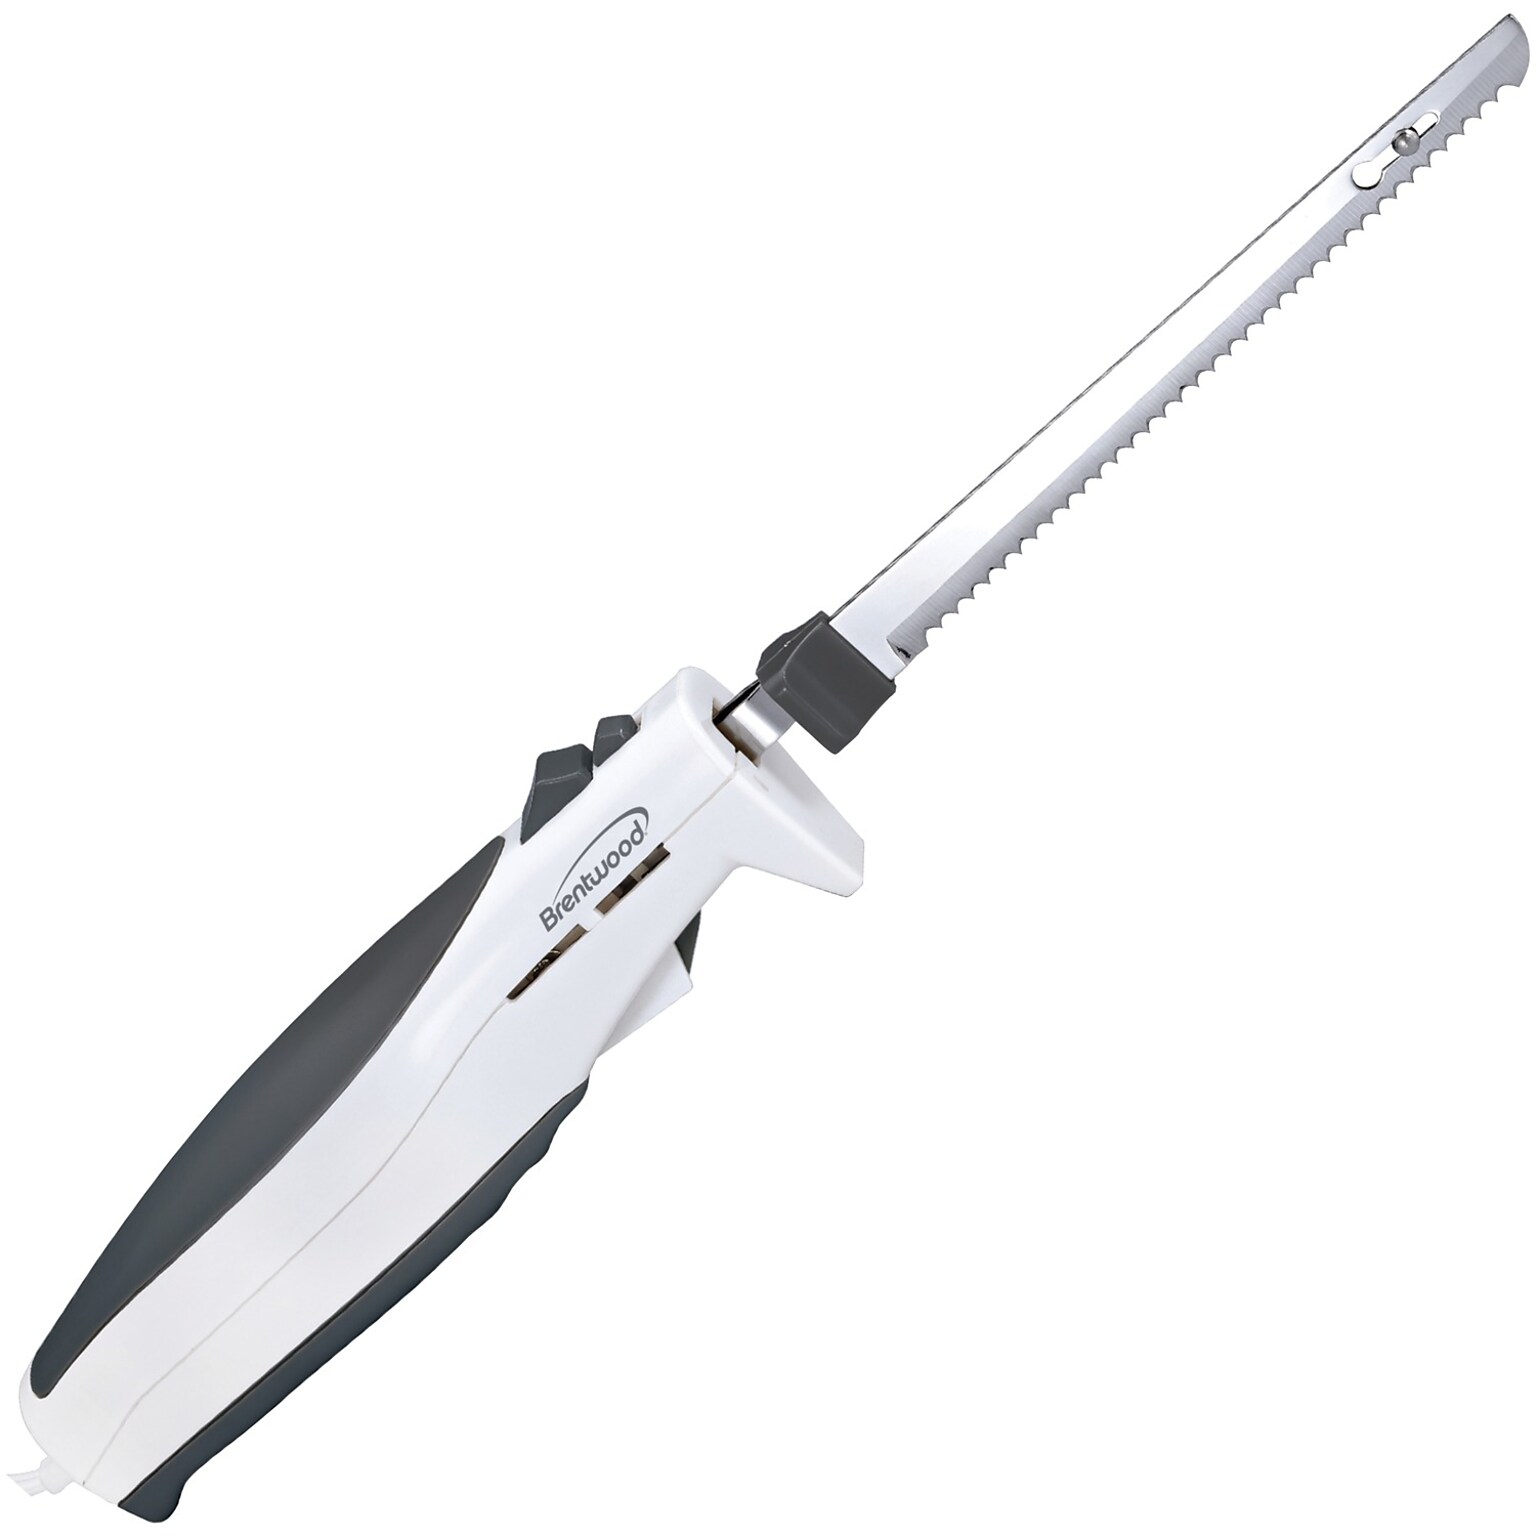 Brentwood Appliances TS-1010 Stainless Steel 7 in. Electric Carving Knife